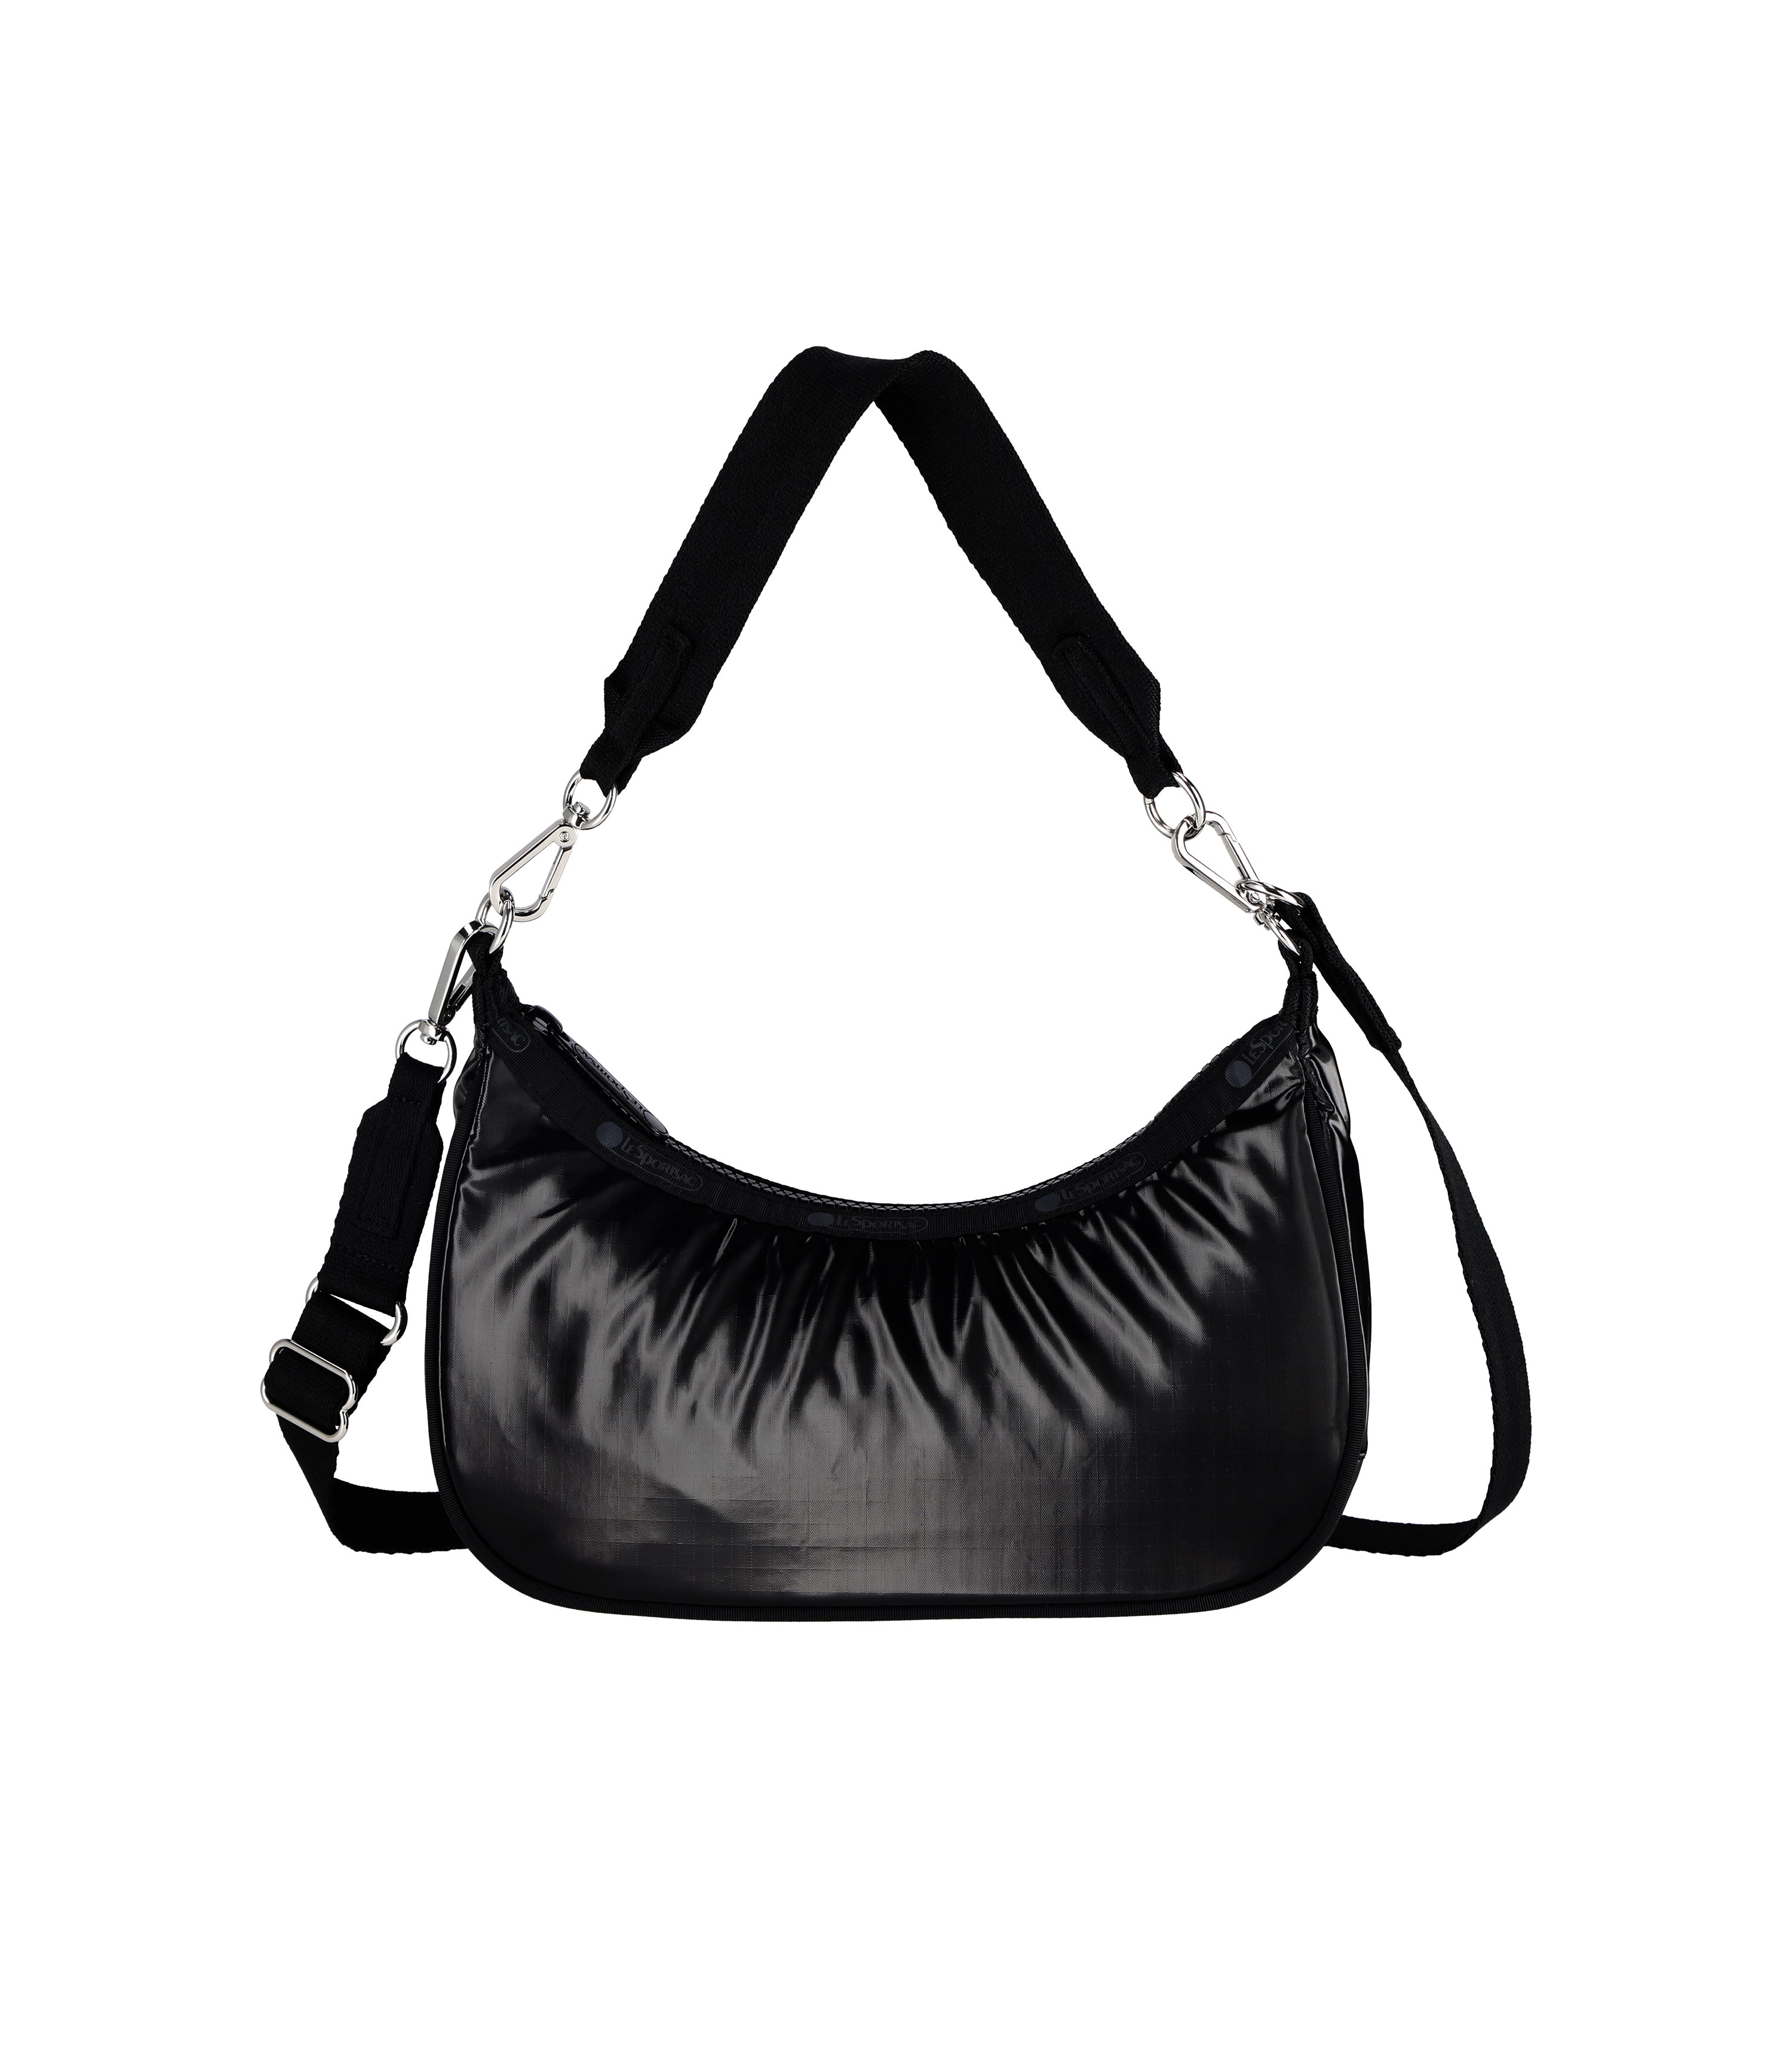 Patent Leather Hobo Bags & Purses for Women